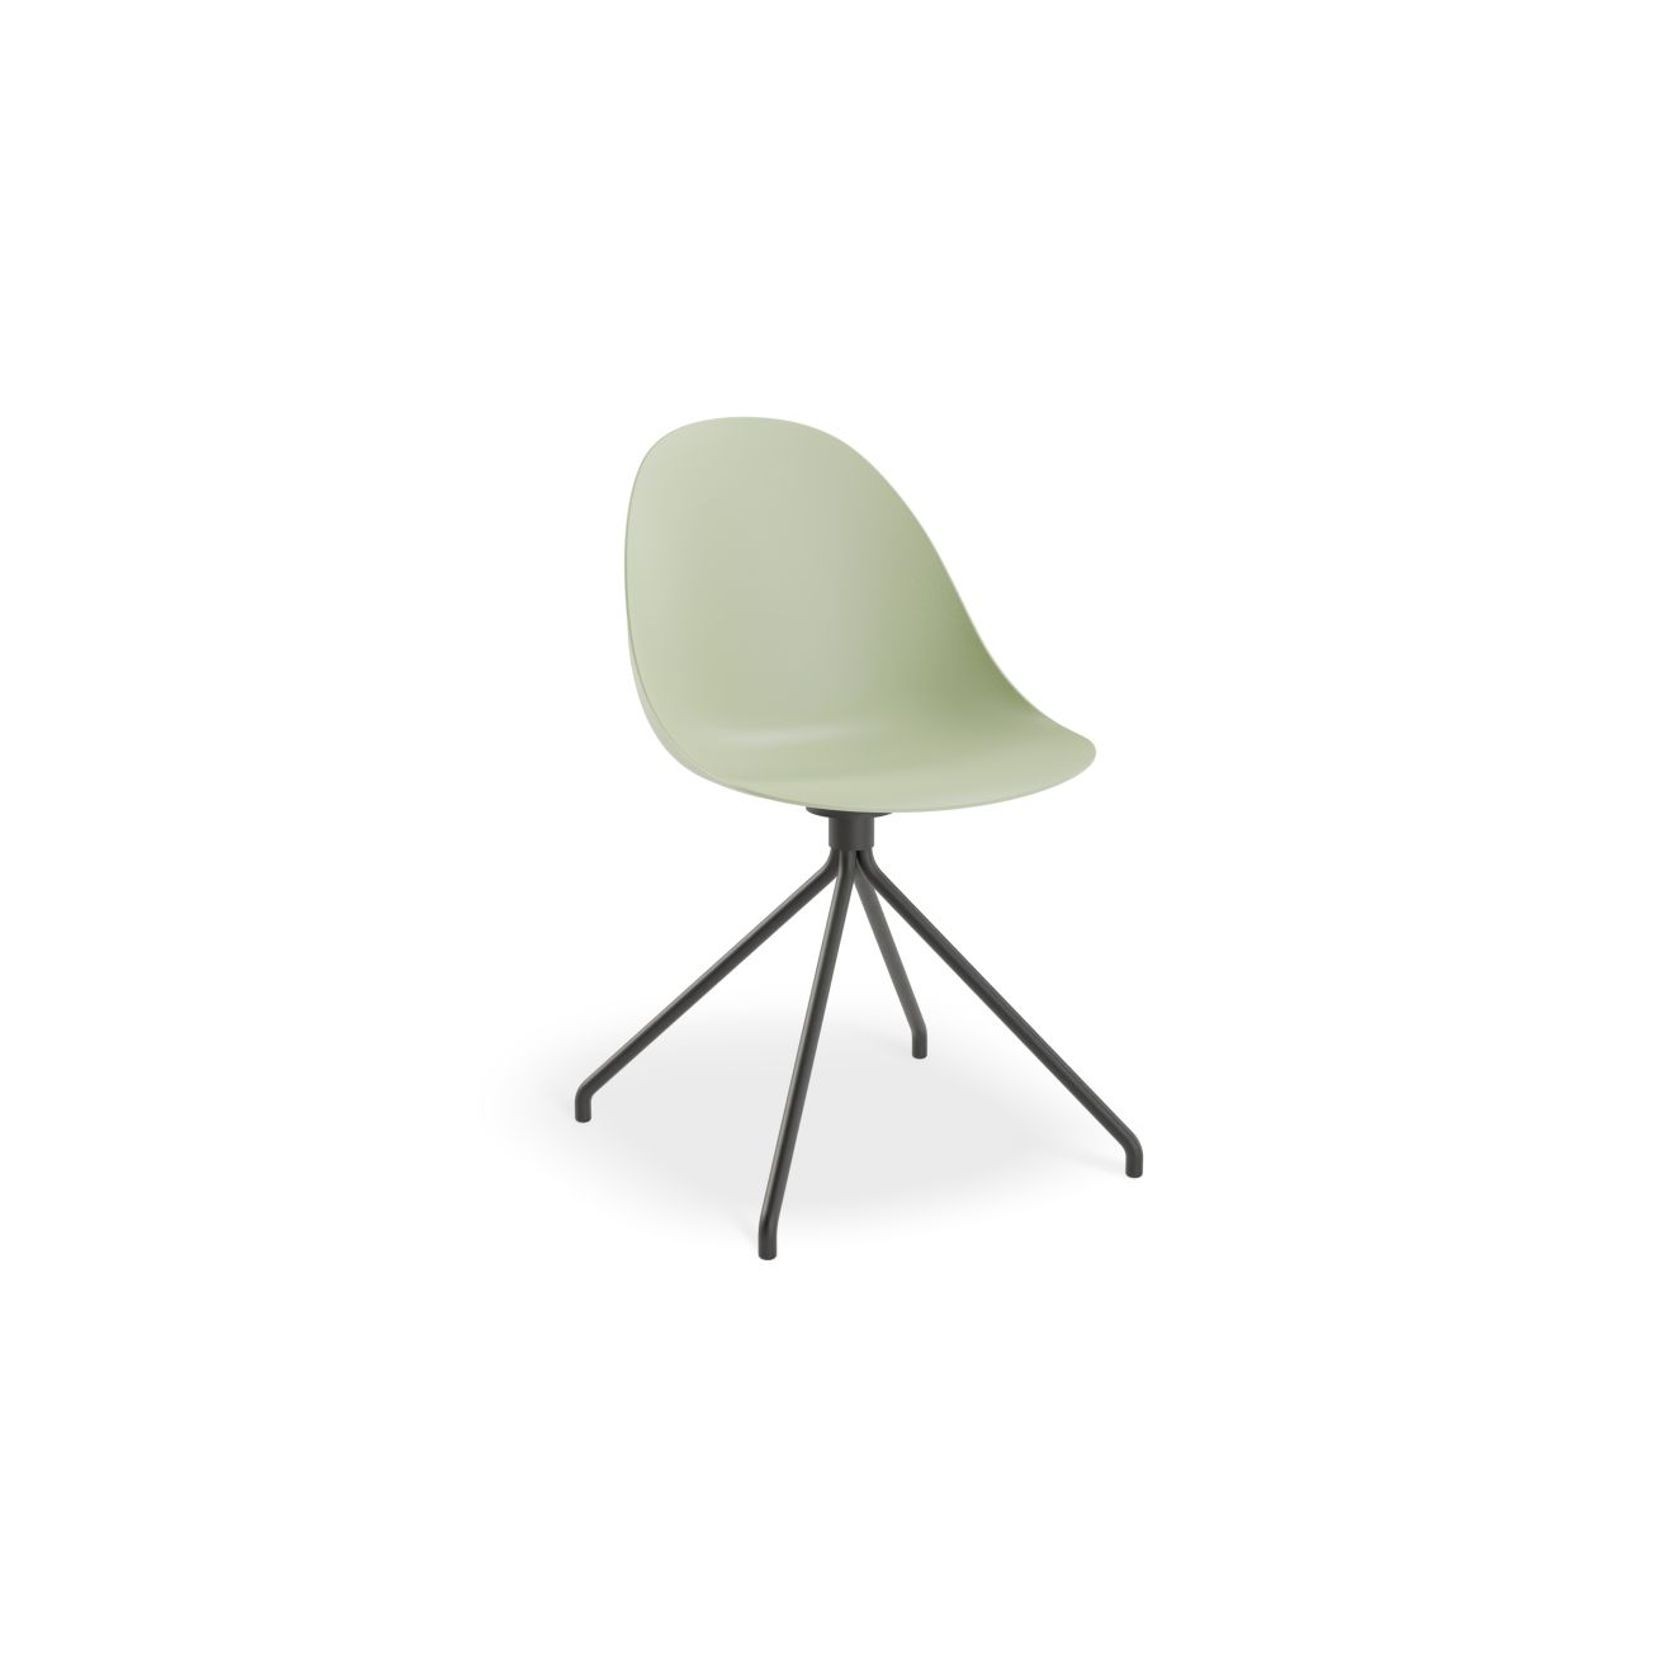 Pebble Chair Mint Green with Shell Seat - Pyramid Fixed Base with Castors - Black gallery detail image